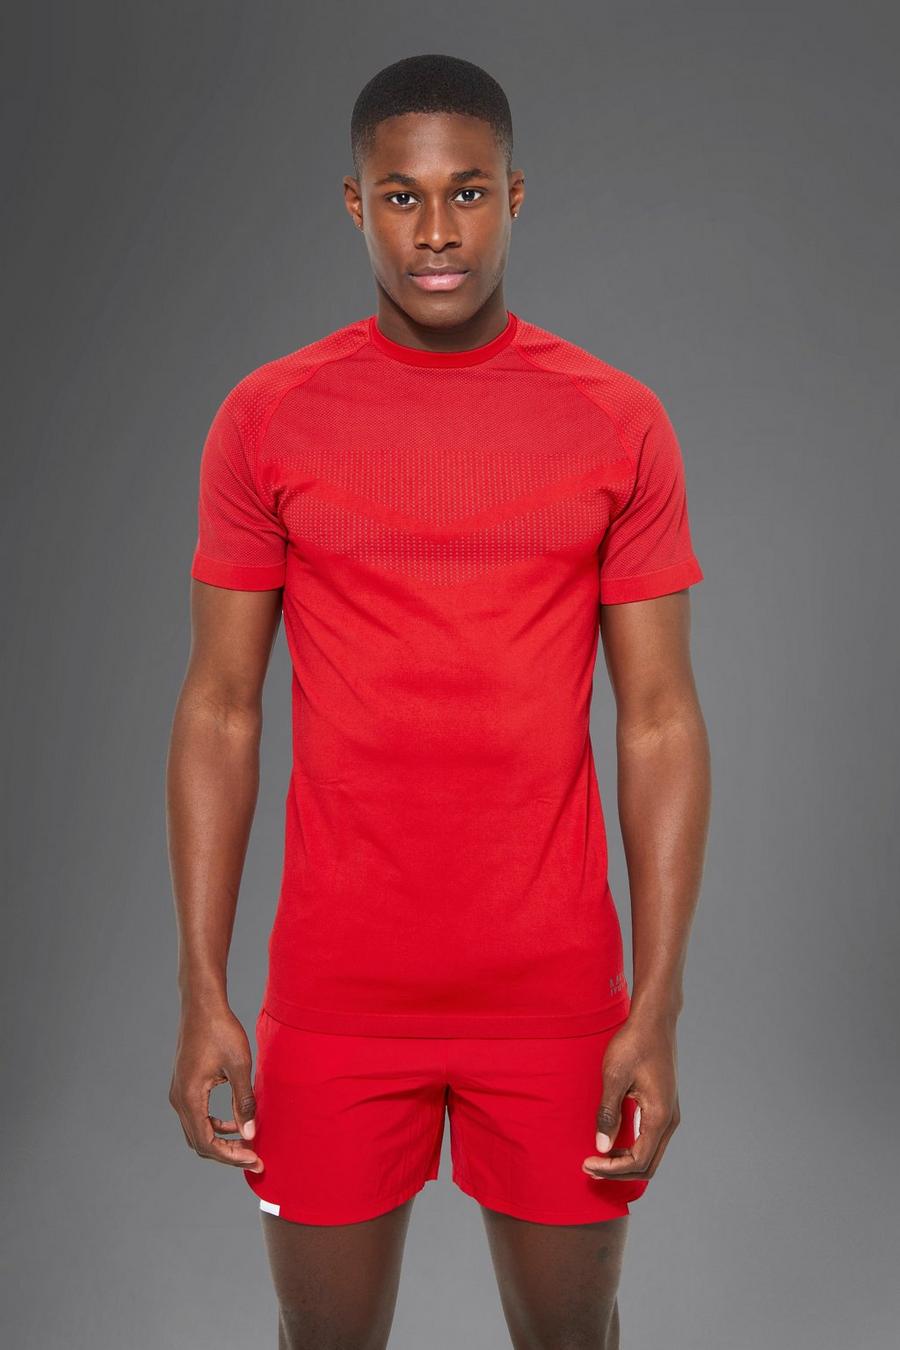 T-shirt style raglan sans coutures - MAN Active, Red rouge